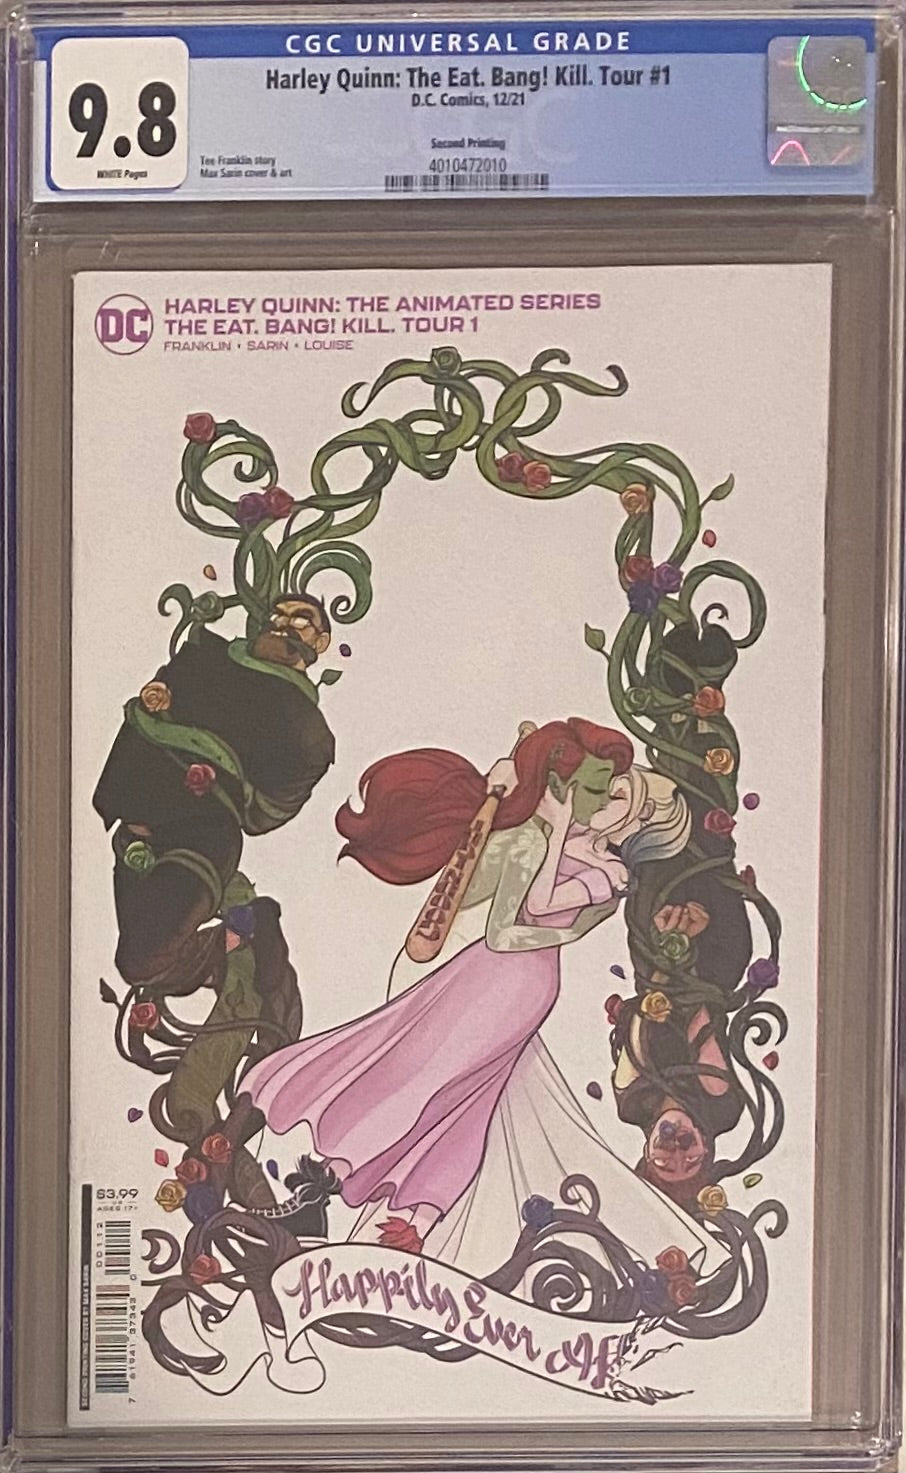 Harley Quinn: The Animated Series - The Eat, Bang! Kill Tour #1 Second Printing CGC 9.8